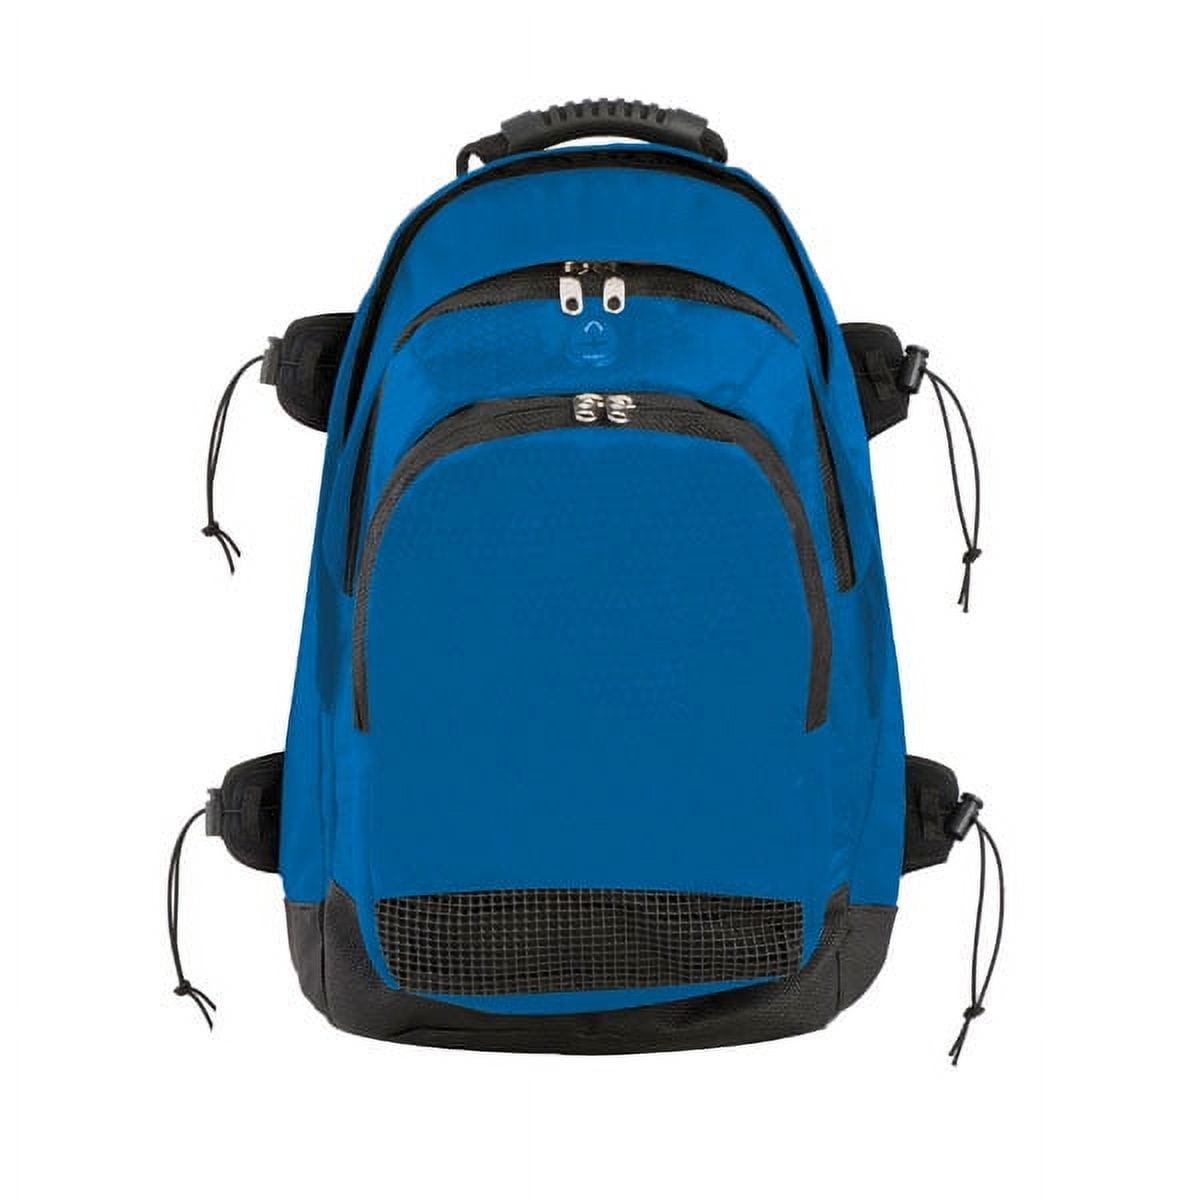 Bp802bl 13 X 20 X 10 In. Deluxe All Purpose Backpack, Royal Blue